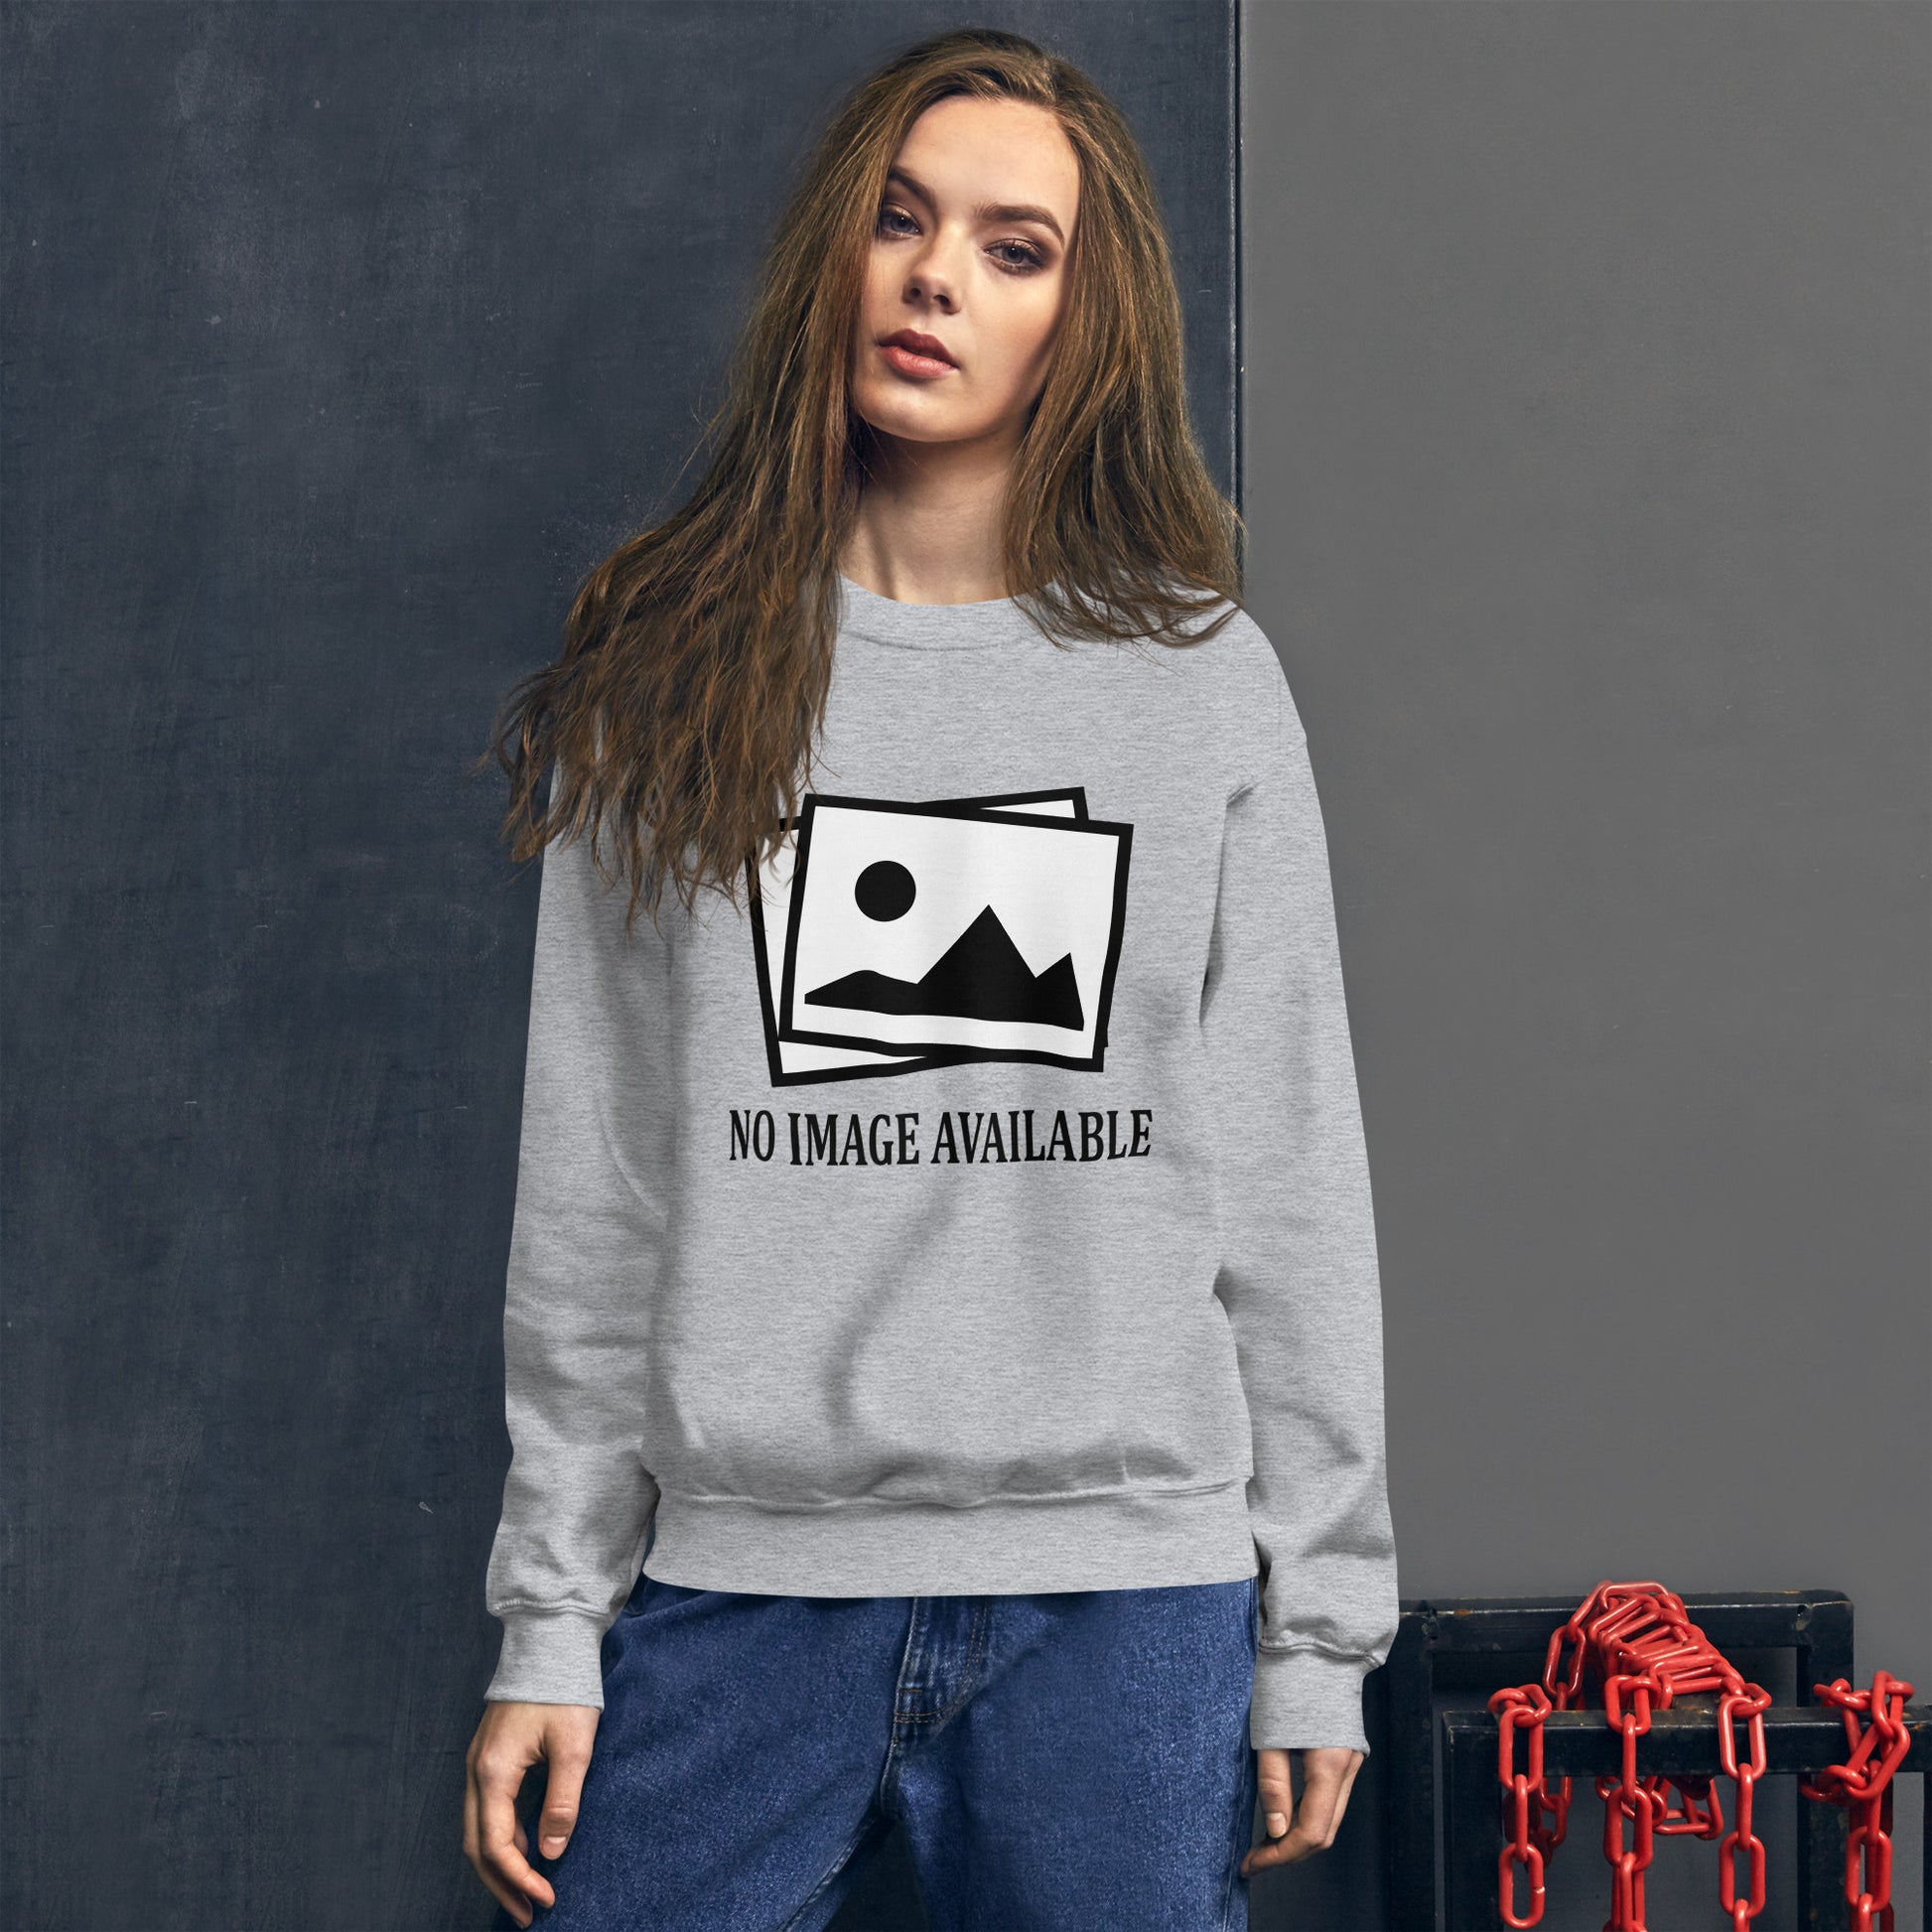 Women with grey sweatshirt with image and text "no image available"